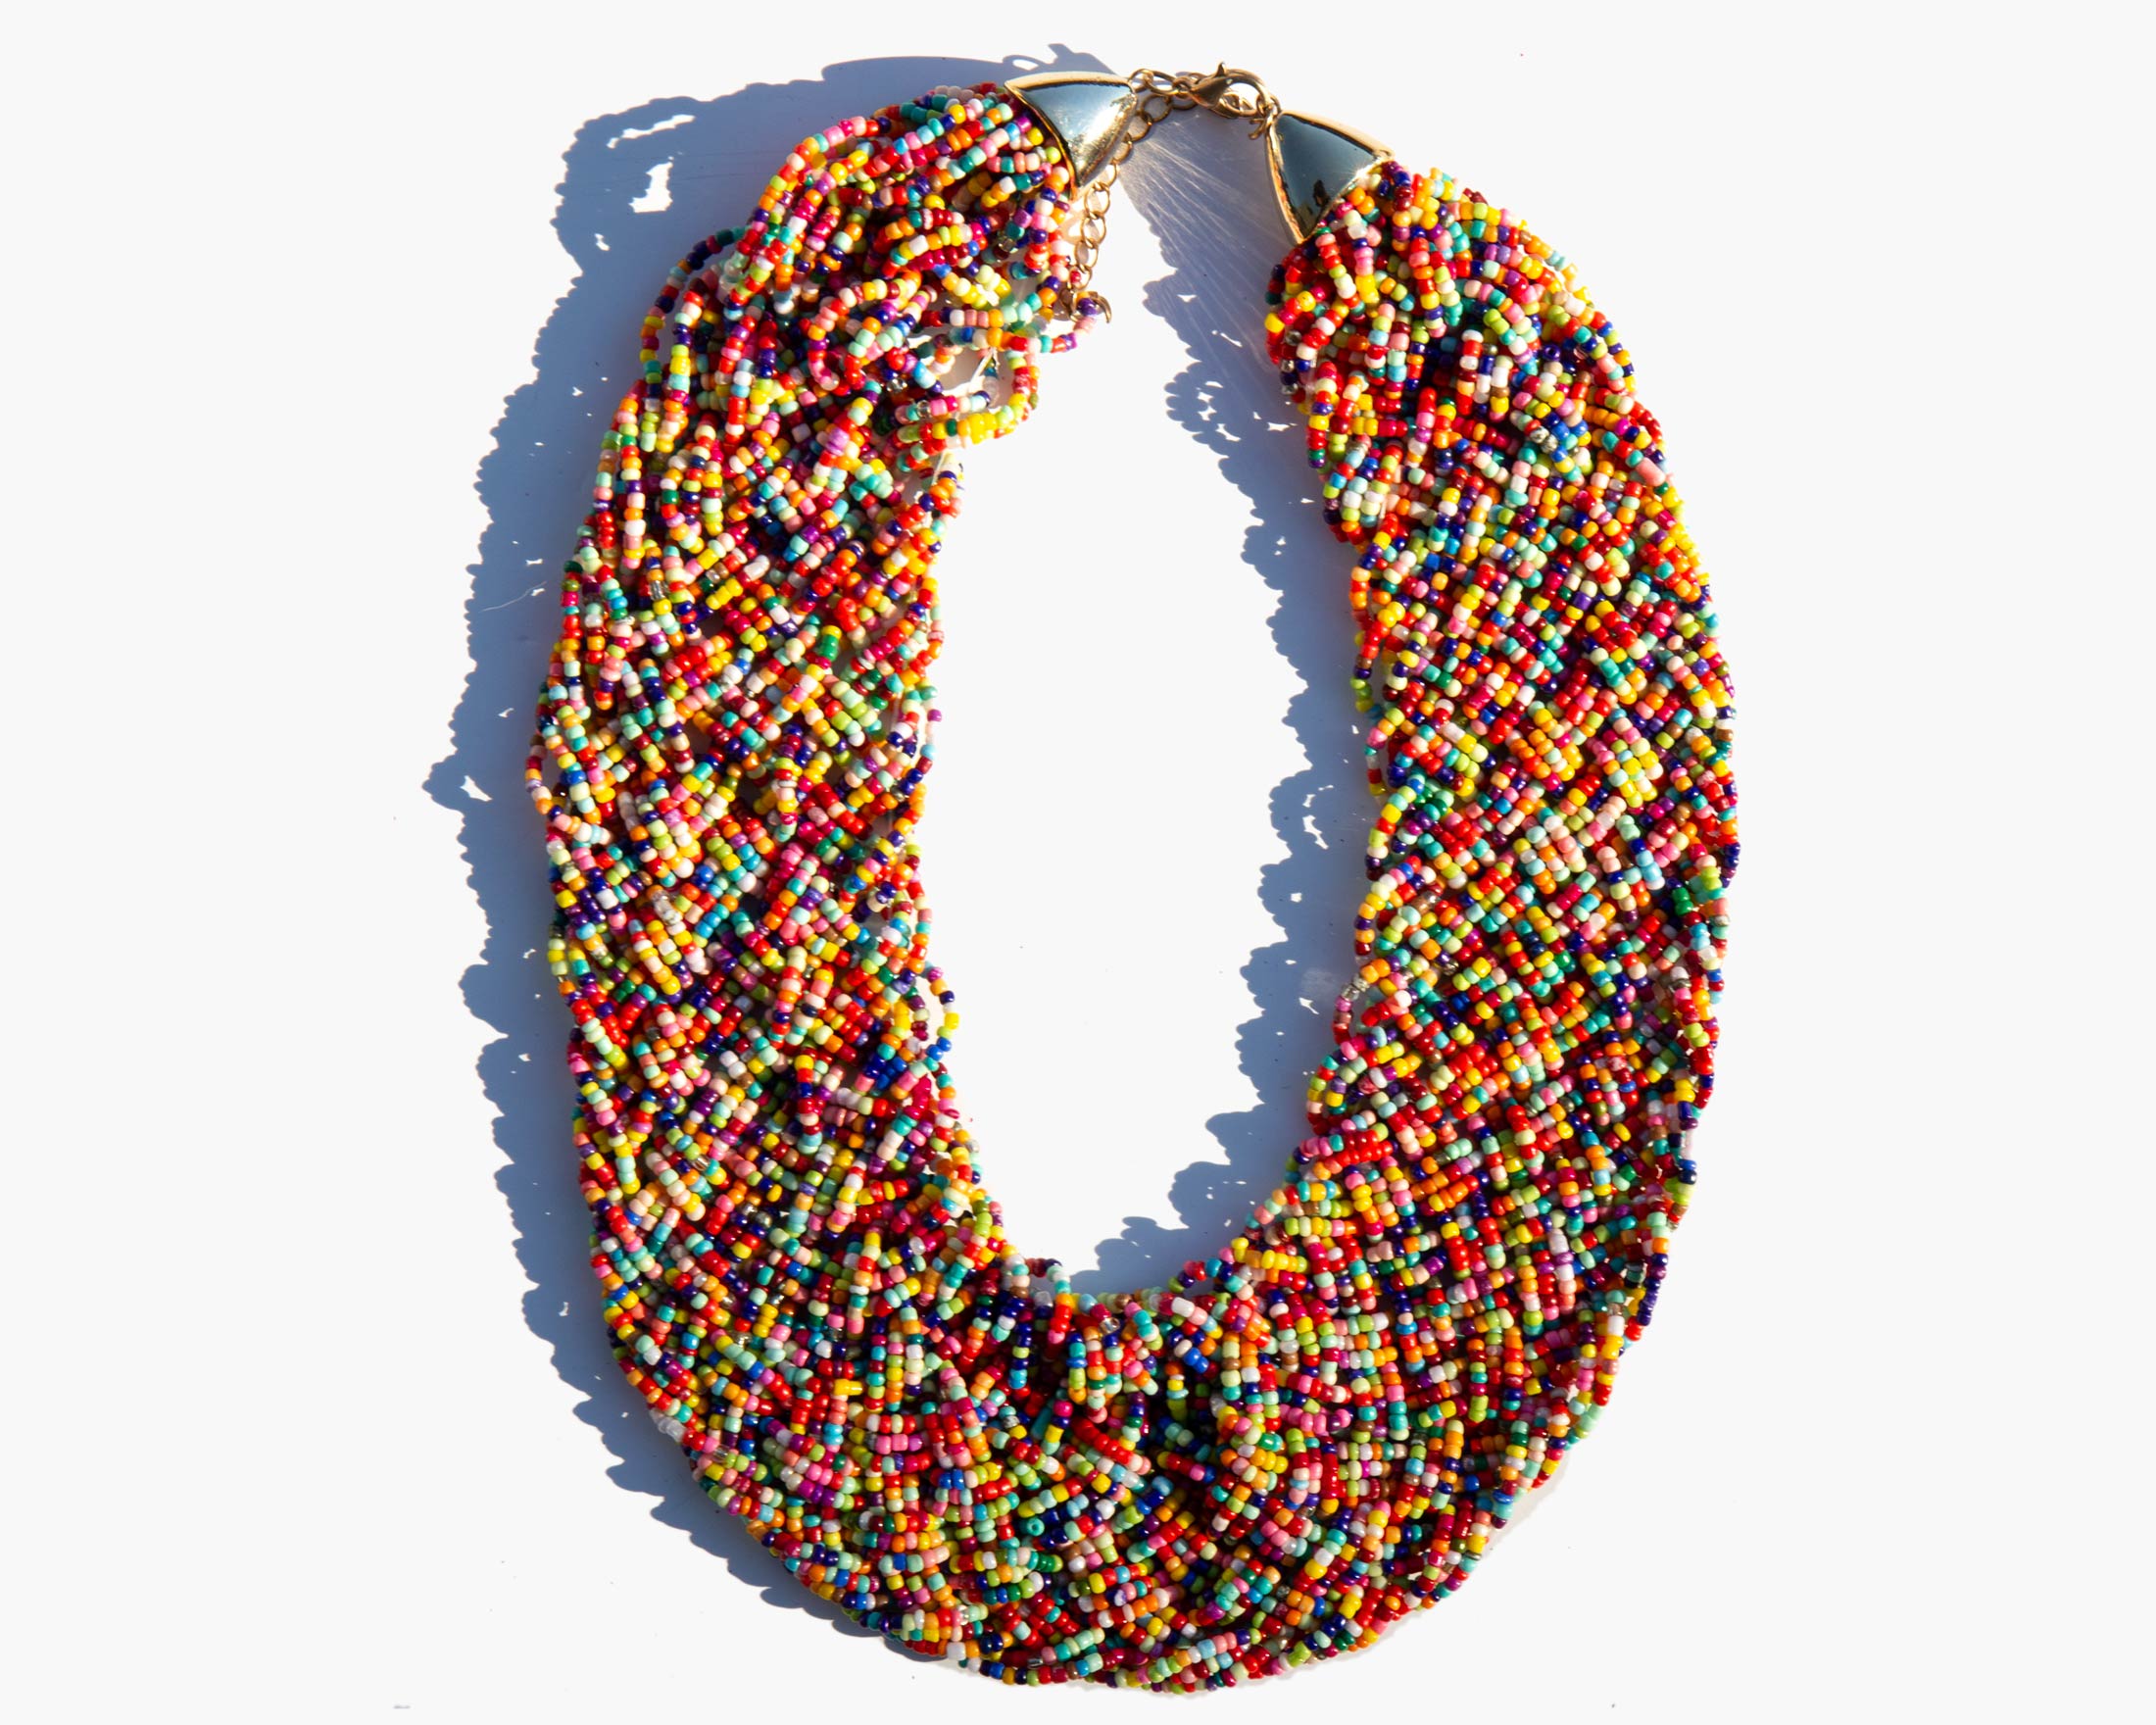 Candy Collar Necklace